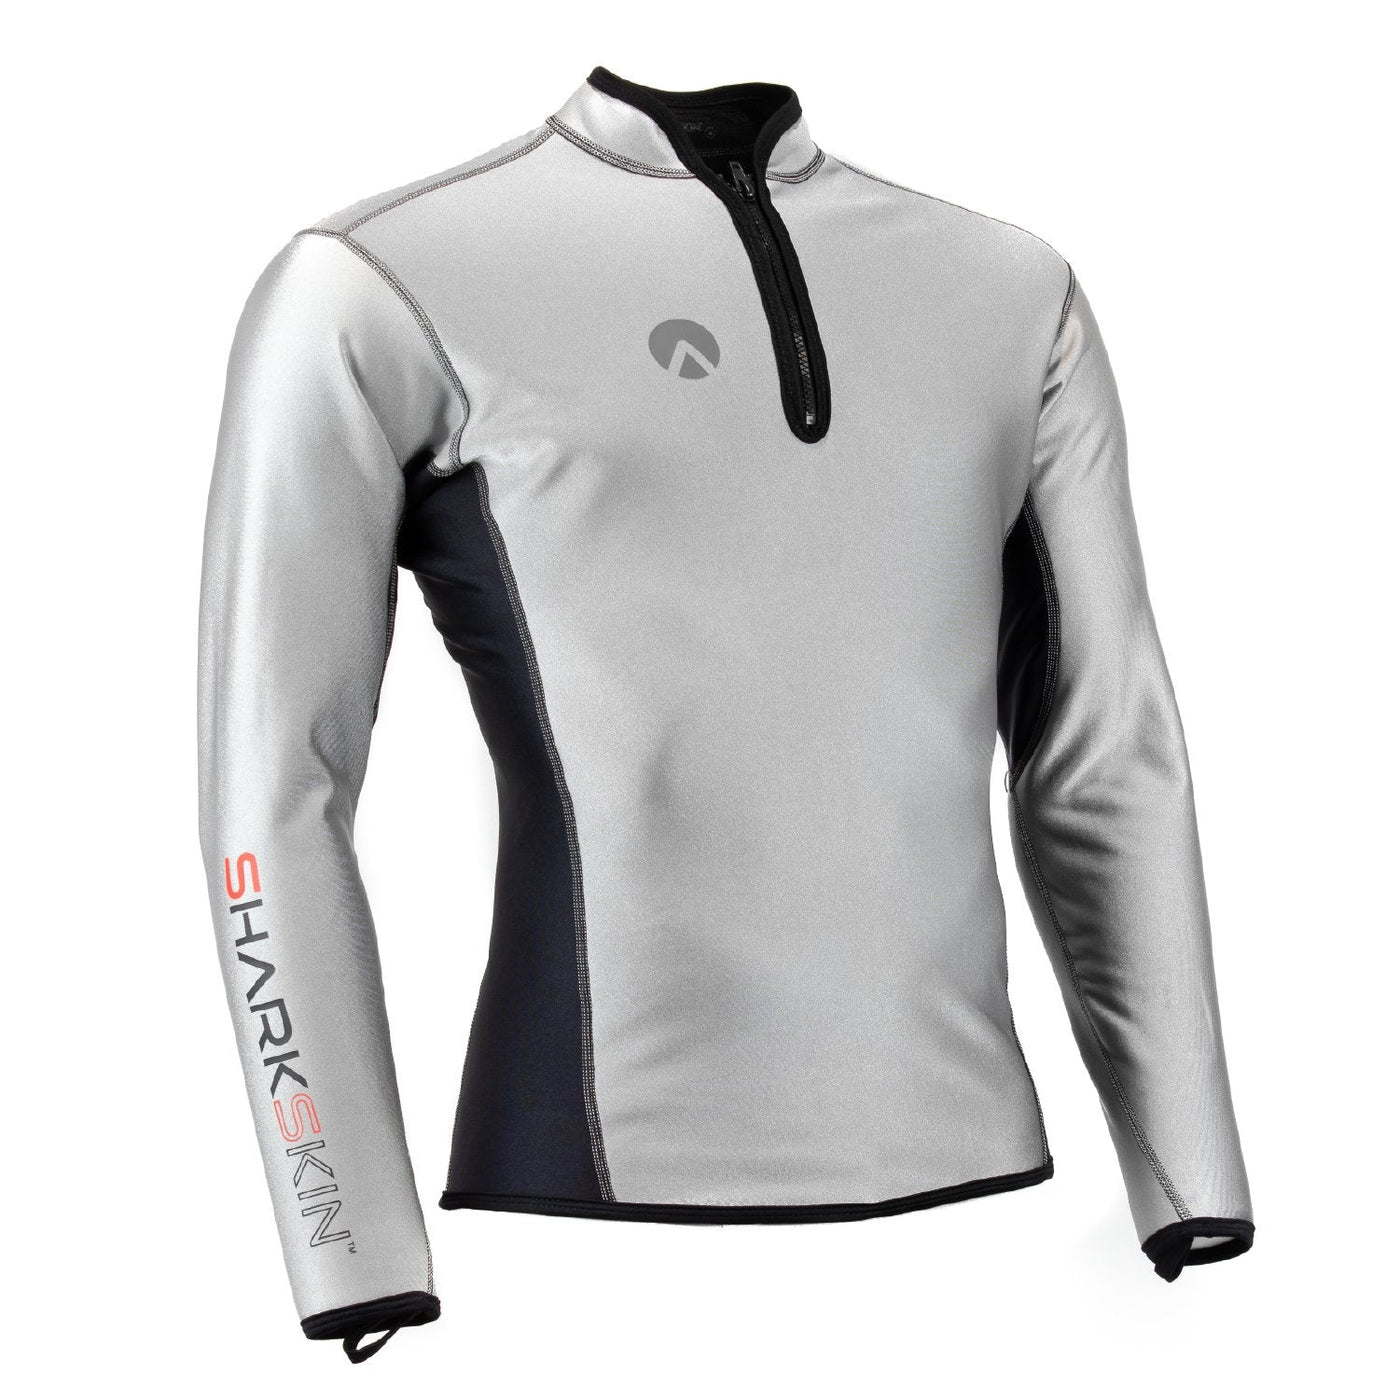 CHILLPROOF LONG SLEEVE CHEST ZIP TOP - MENS (SECONDS)